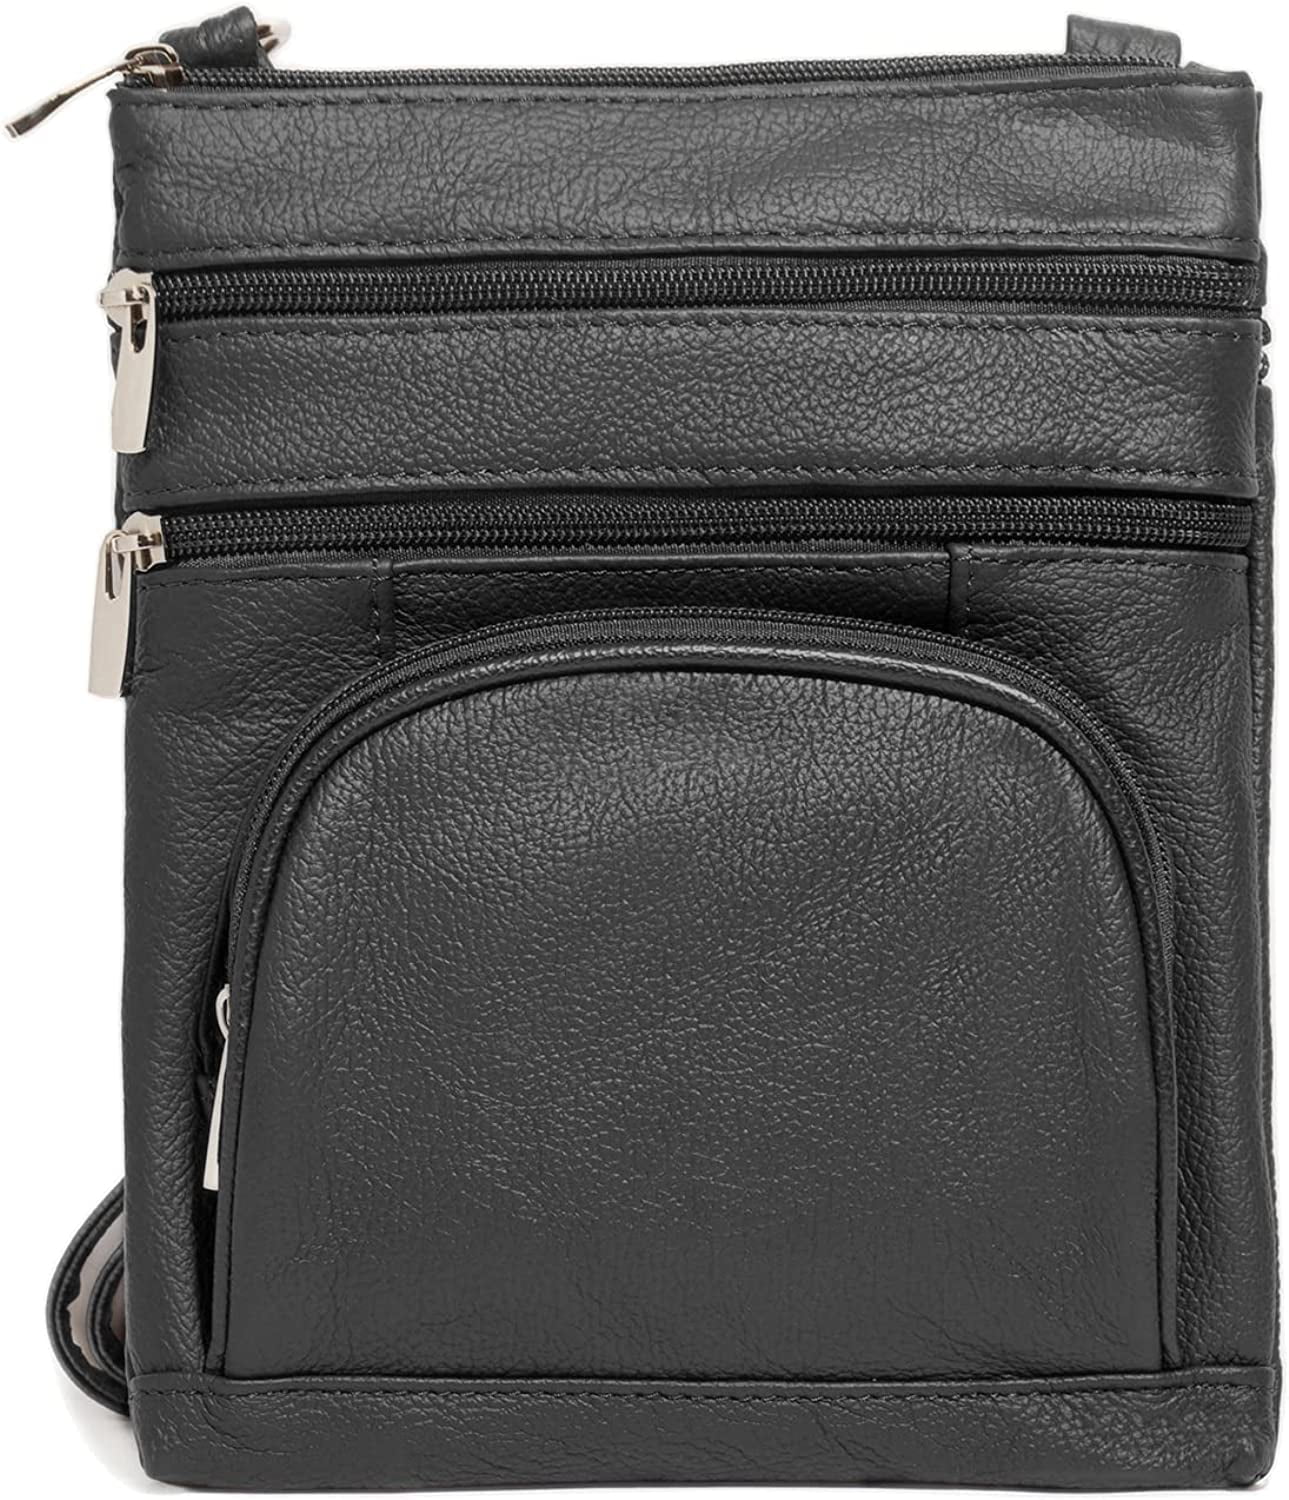 Set of Crossbody Vegan Purse, Wallets with RFID protection